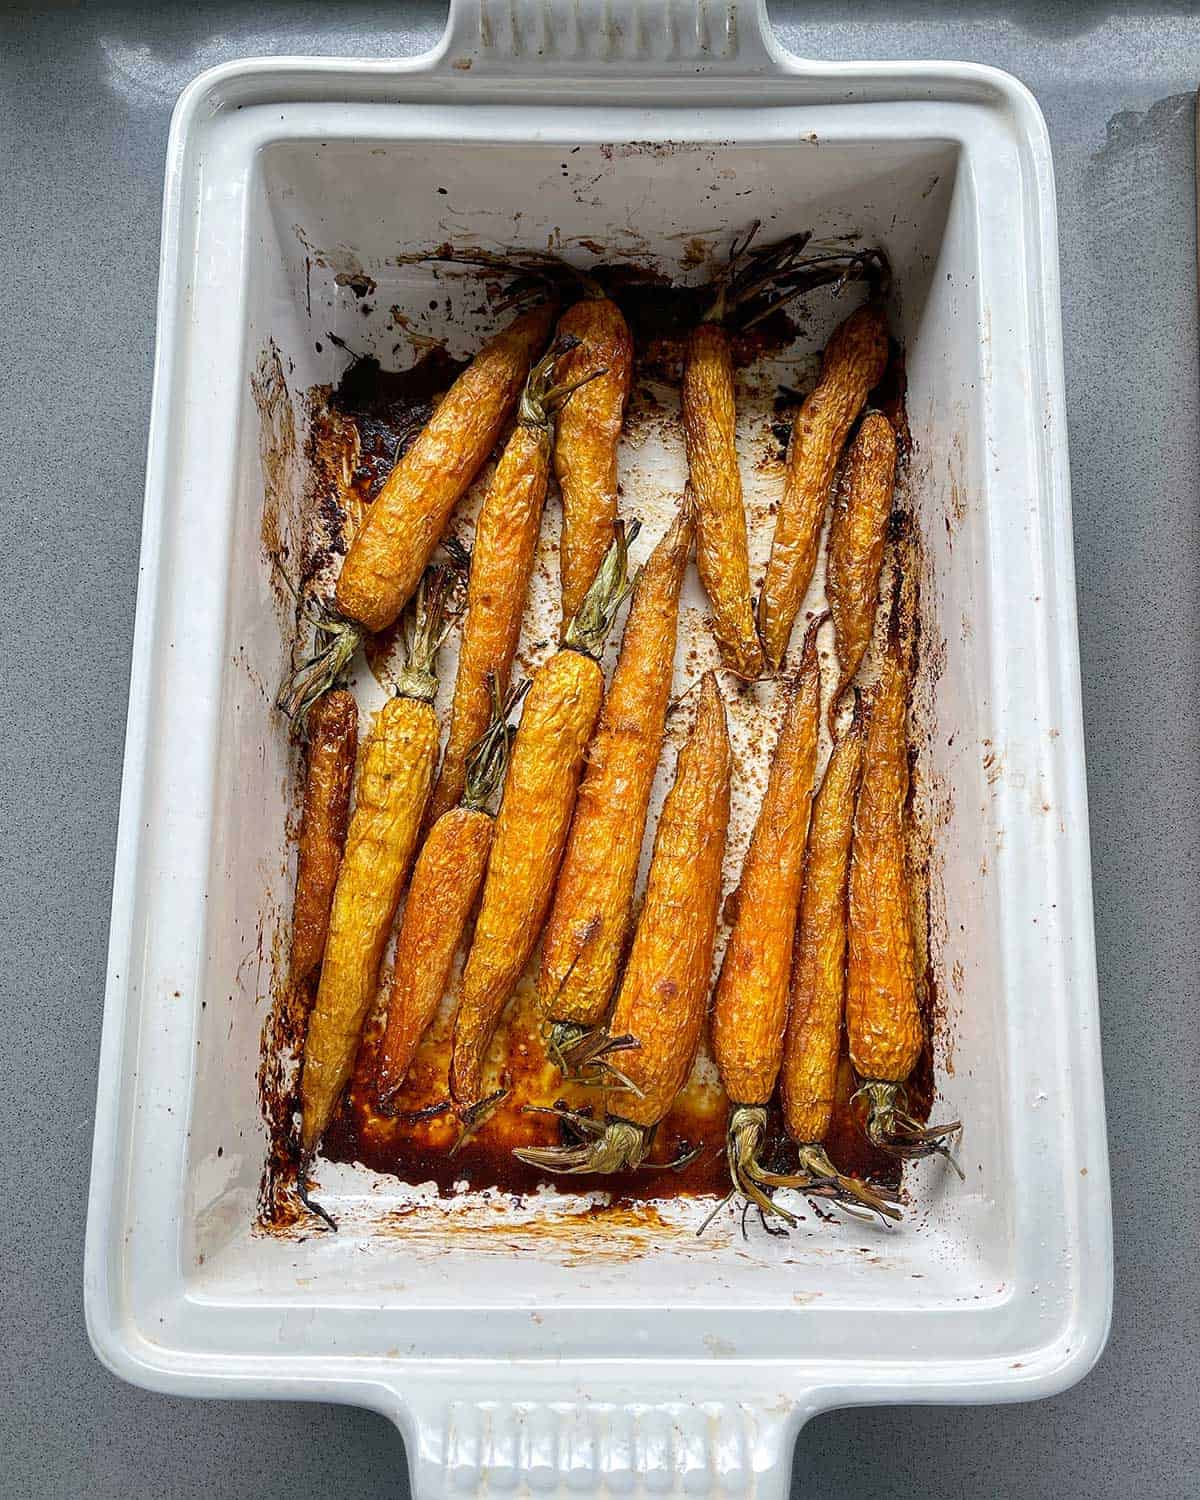 Cooked carrots in a white baking dish.